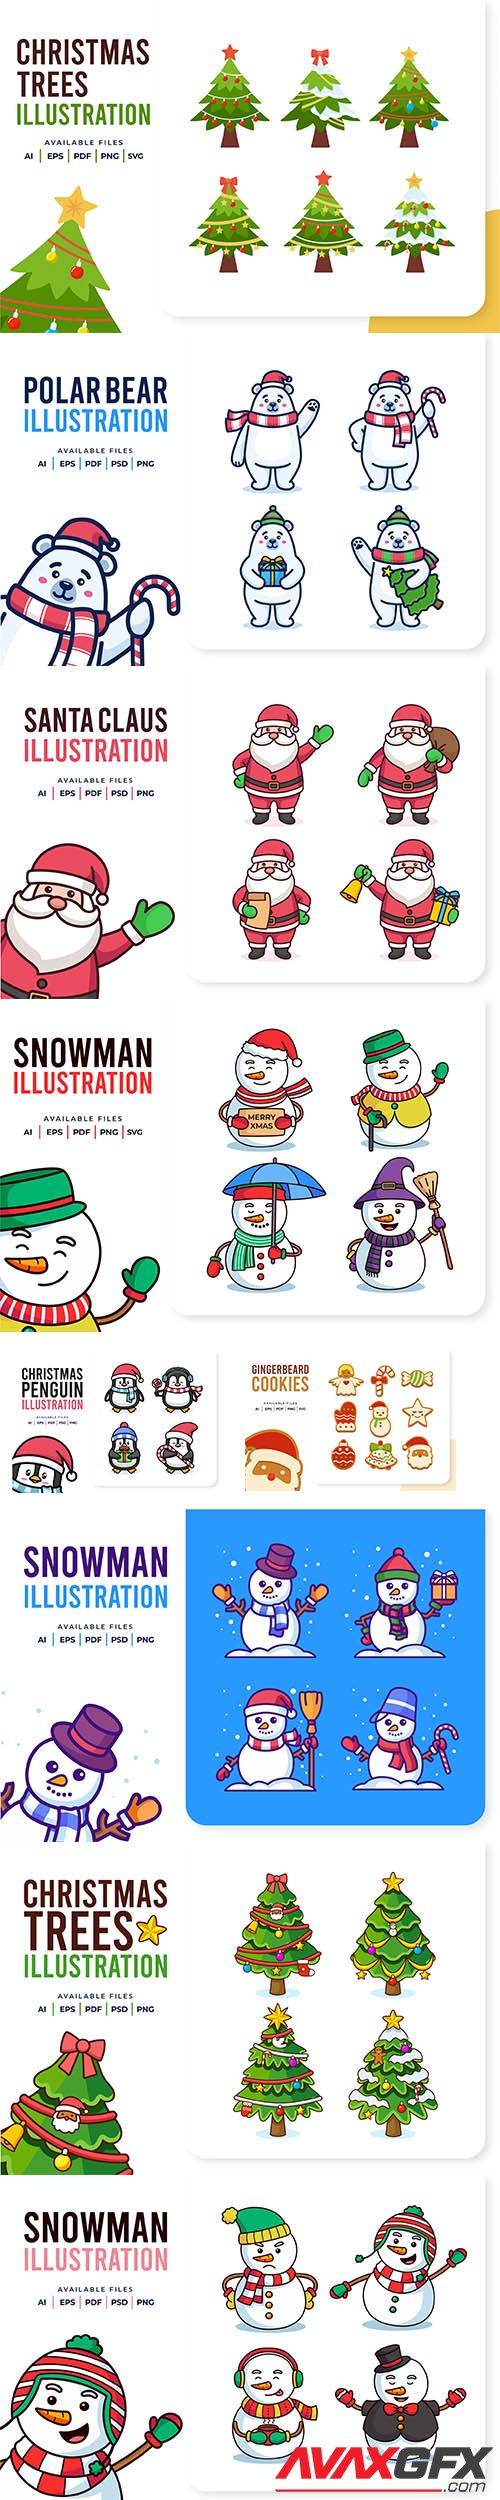 Christmas Collection of Santa Claus, Snowman and trees